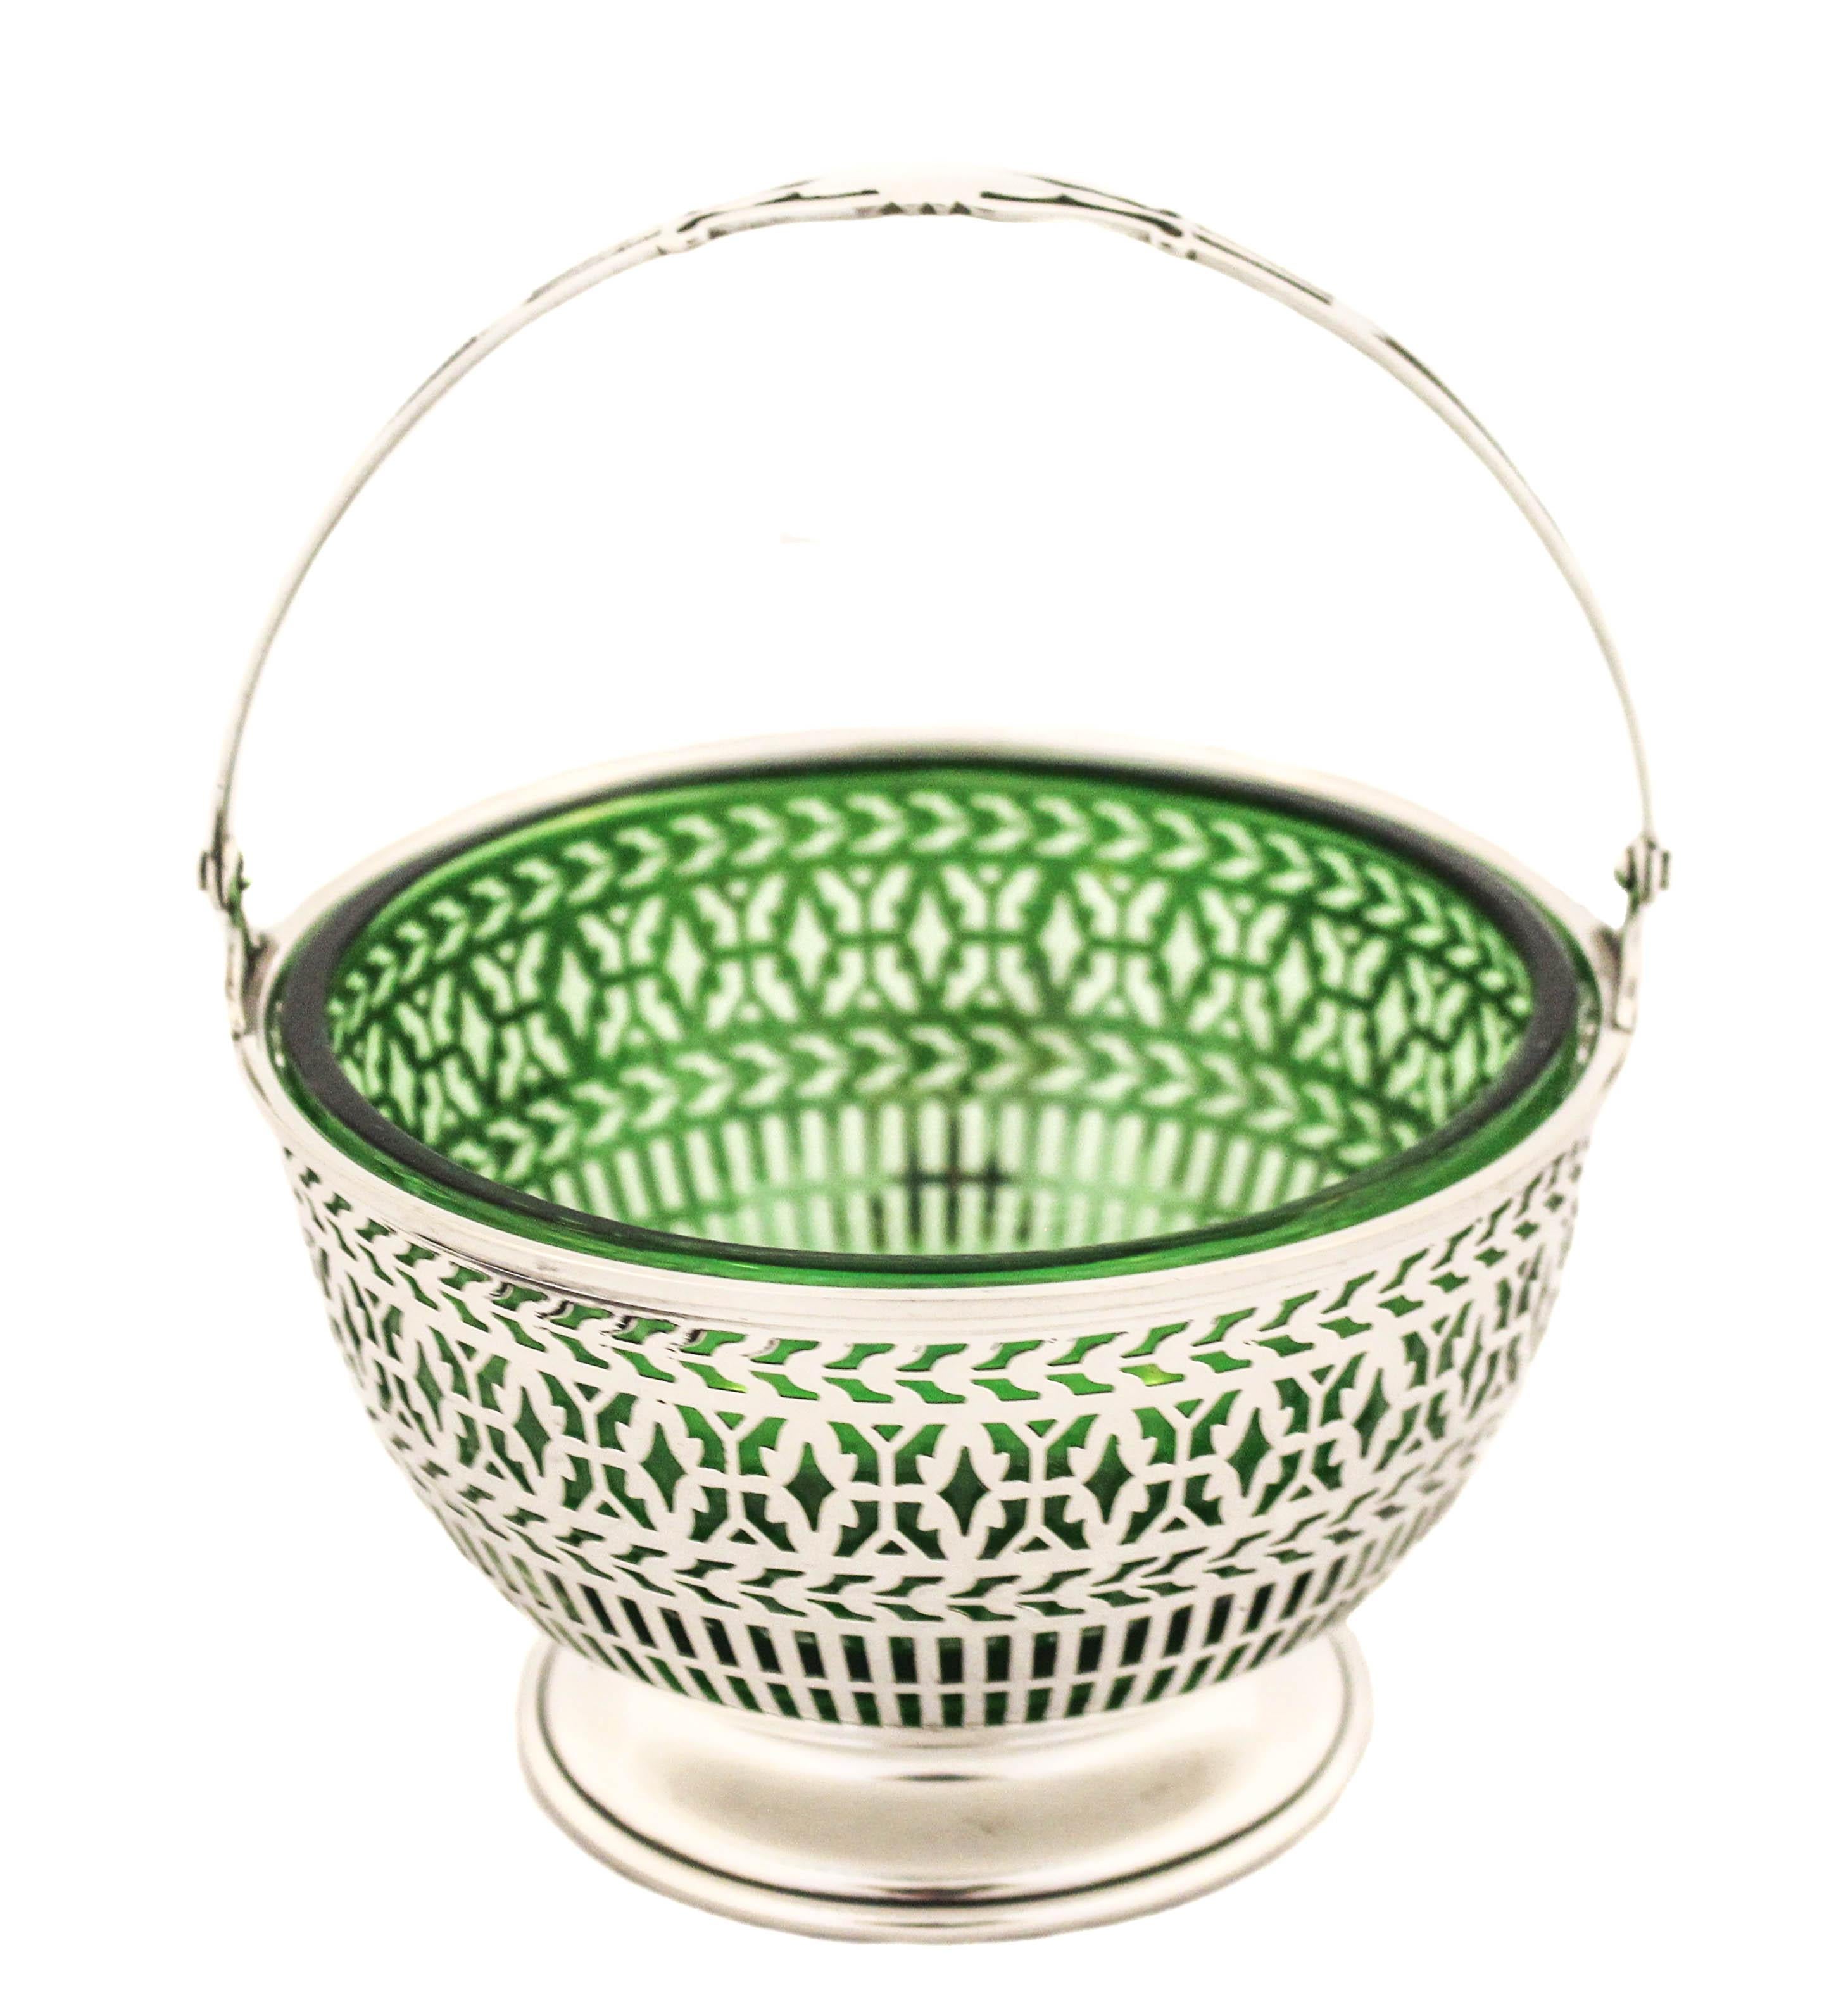 This sterling silver basket with a green liner is being offered. It has a reticulated design that lets the green liner show through. Green is such a beautiful color and definitely adds life to any room or decor. The handle folds down for easy